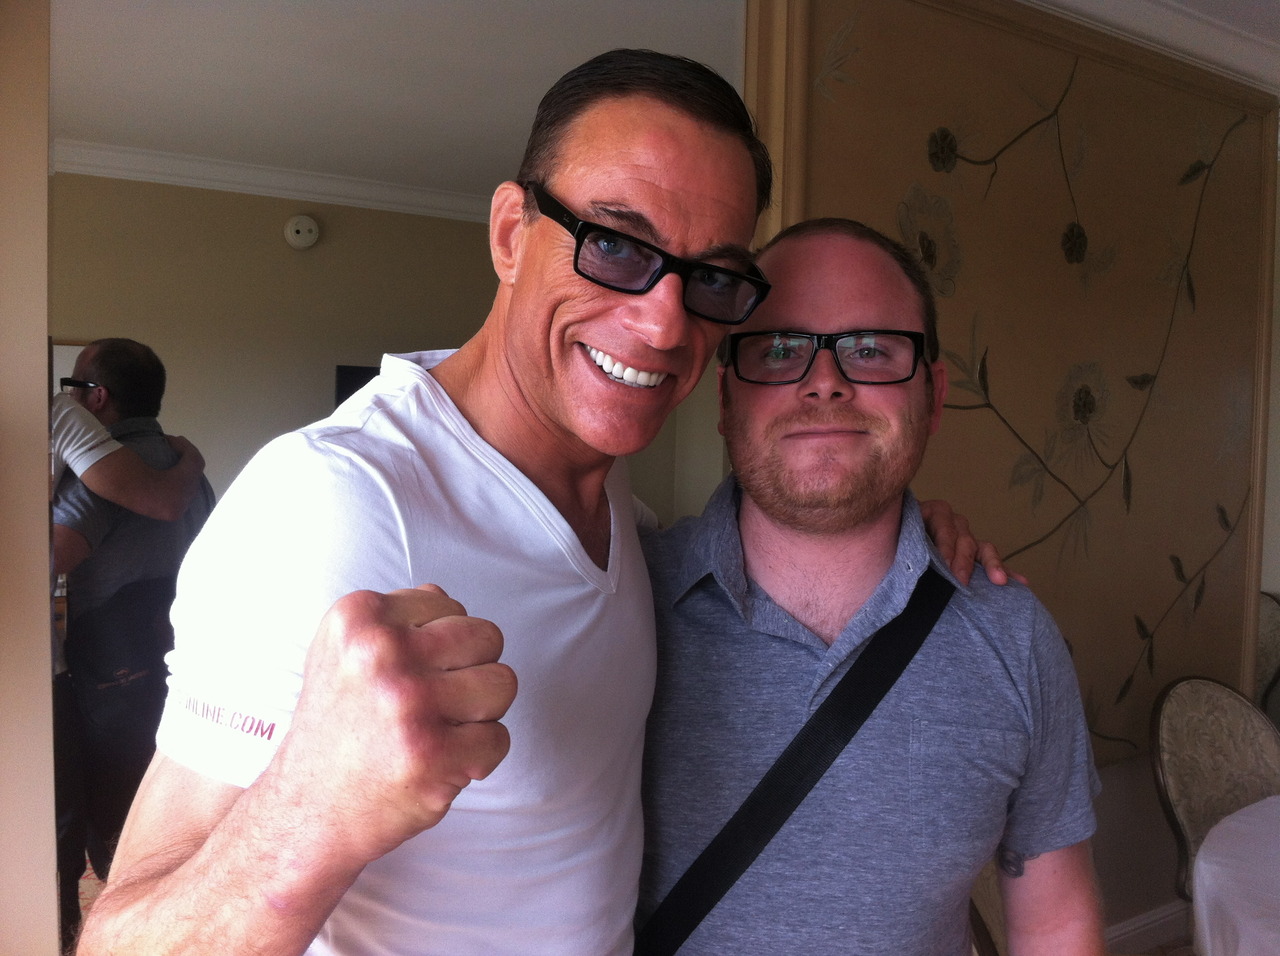 Jean Claude Van Damme - chasewhale.com - ChaseWhale.com